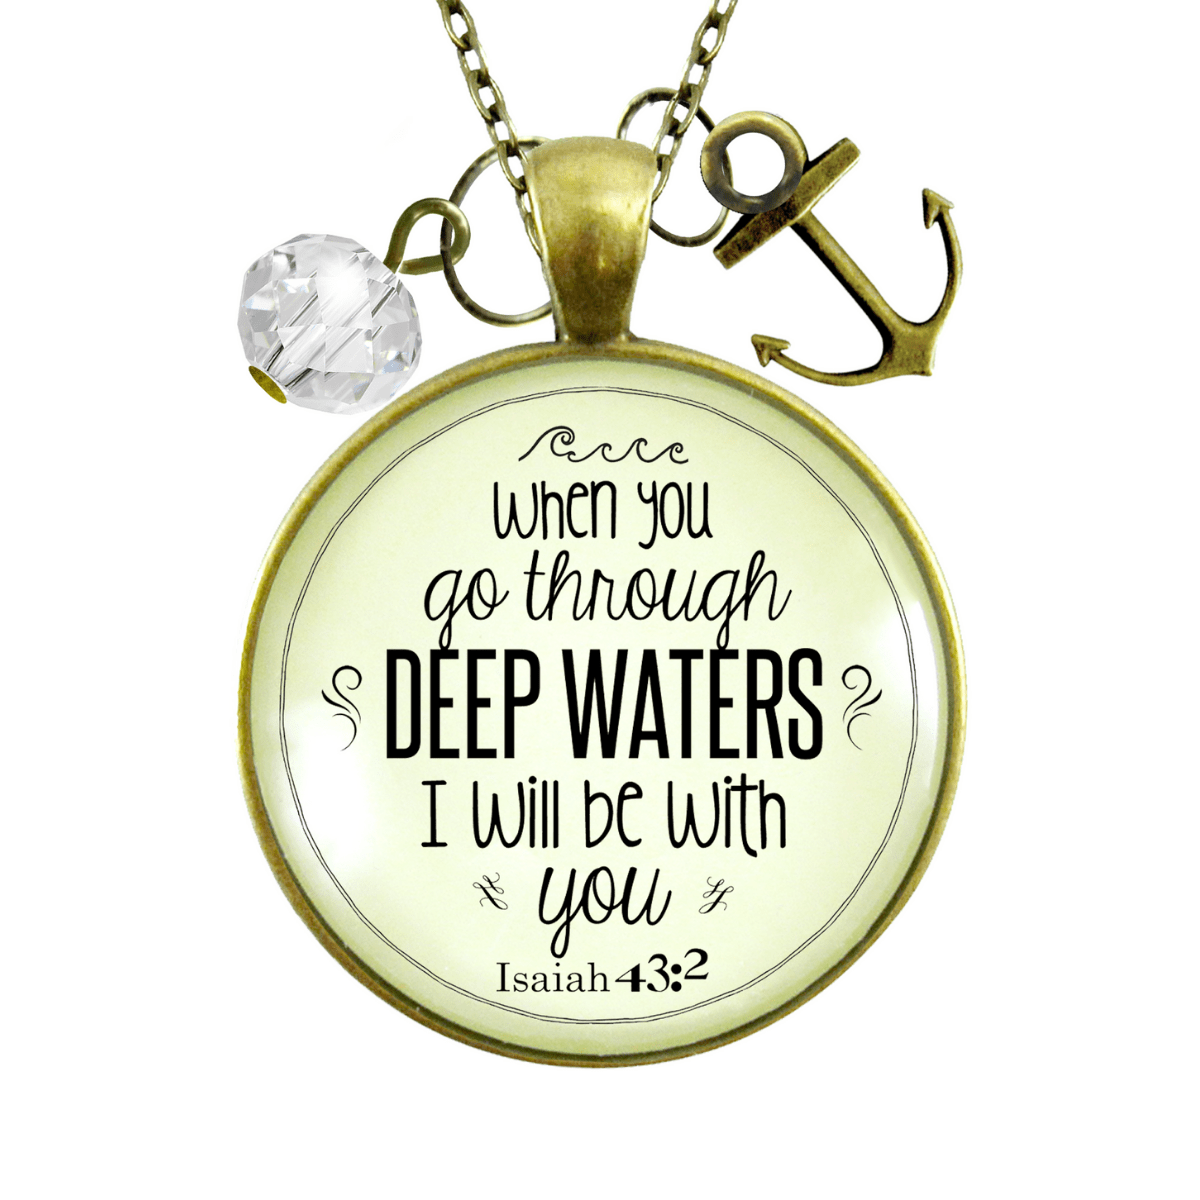 Gutsy Goodness Anchor Necklace Deep Waters Faith Inspired Life Verse Womens Jewelry Gift - Gutsy Goodness Handmade Jewelry;Anchor Necklace Deep Waters Faith Inspired Life Verse Womens Jewelry Gift - Gutsy Goodness Handmade Jewelry Gifts